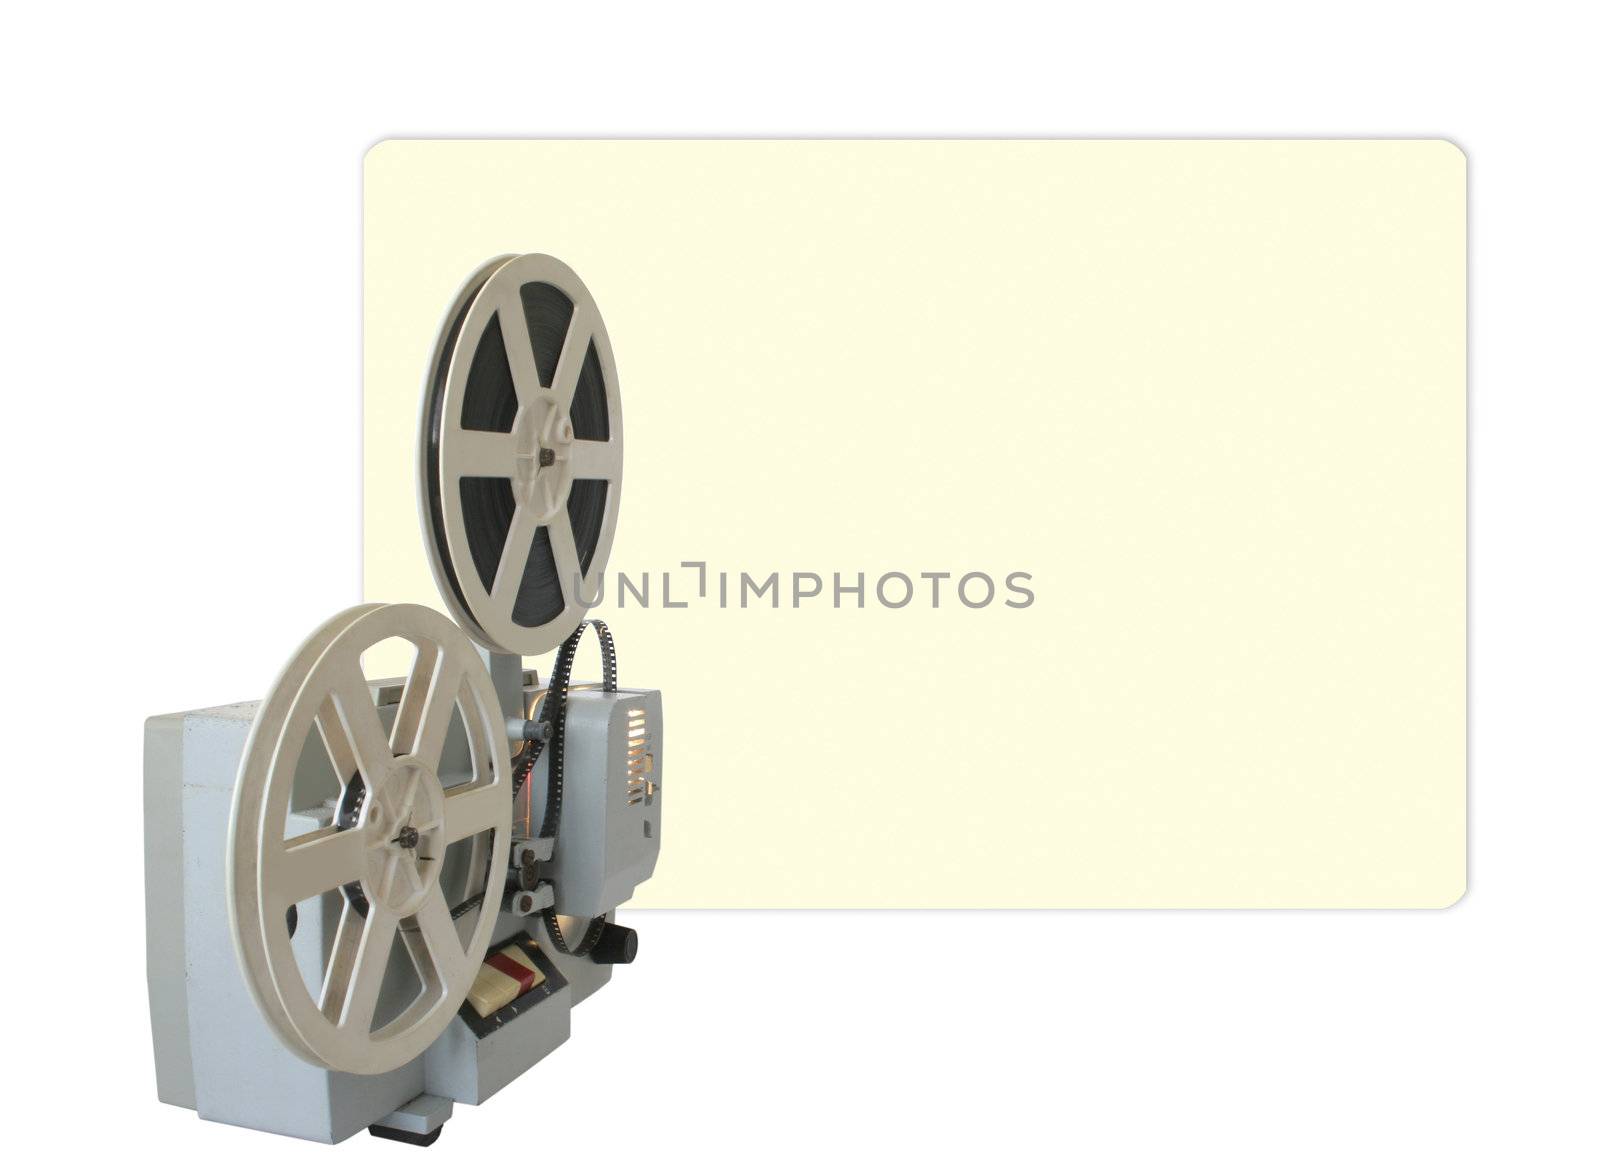 Operational cinema projector with projection on the wall. Isolated.